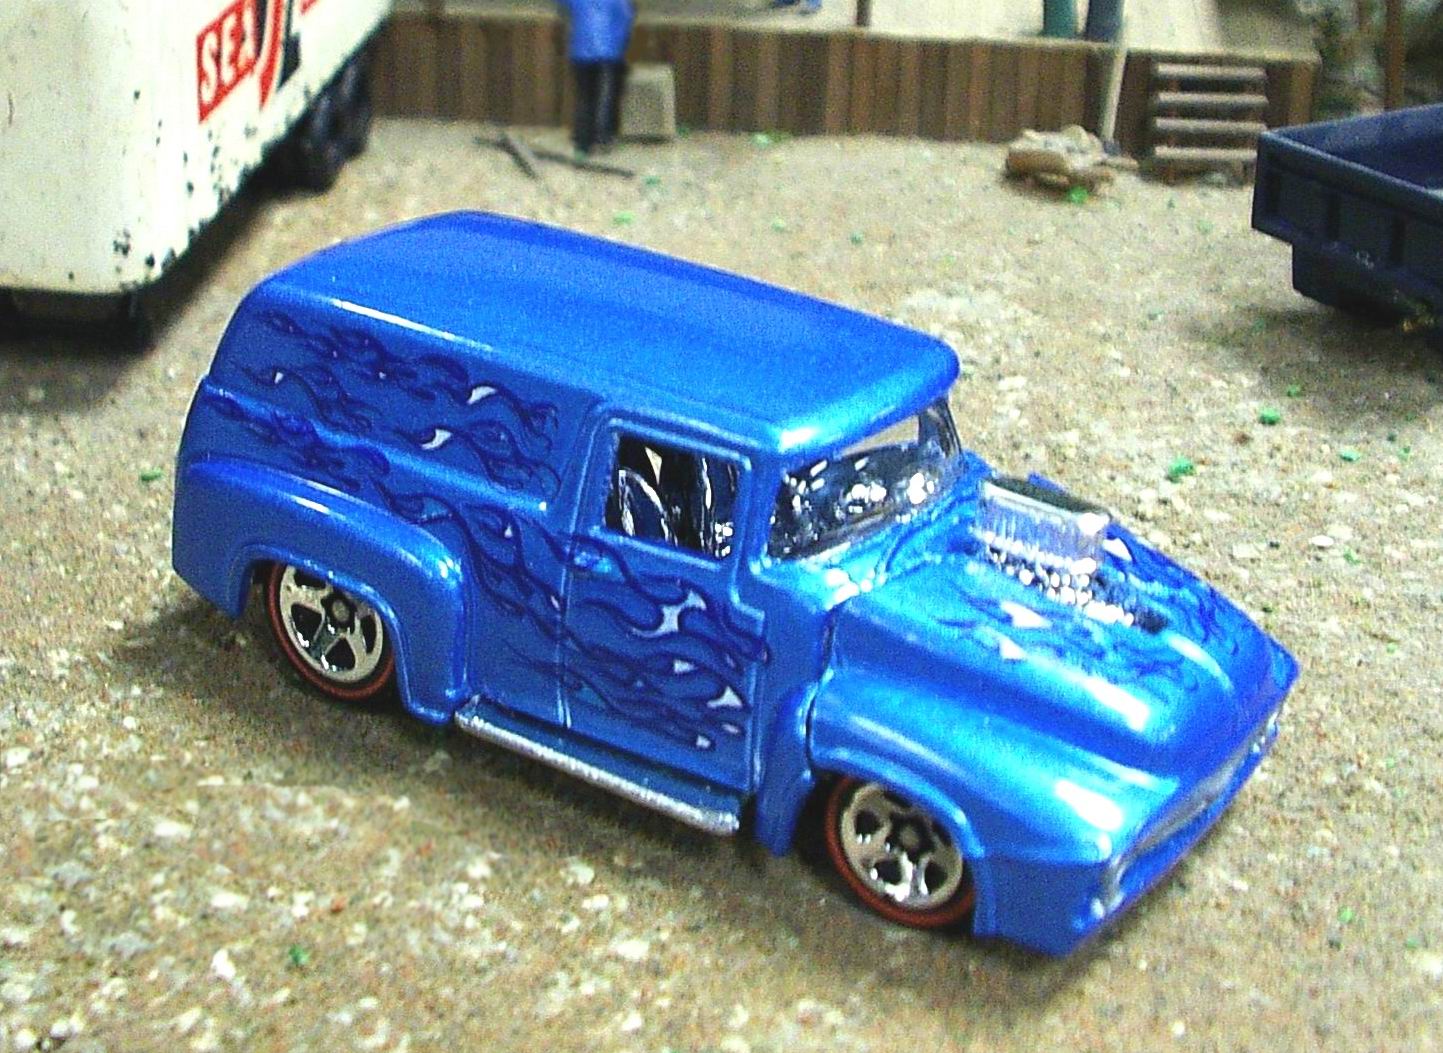 hot wheels 56 ford panel truck